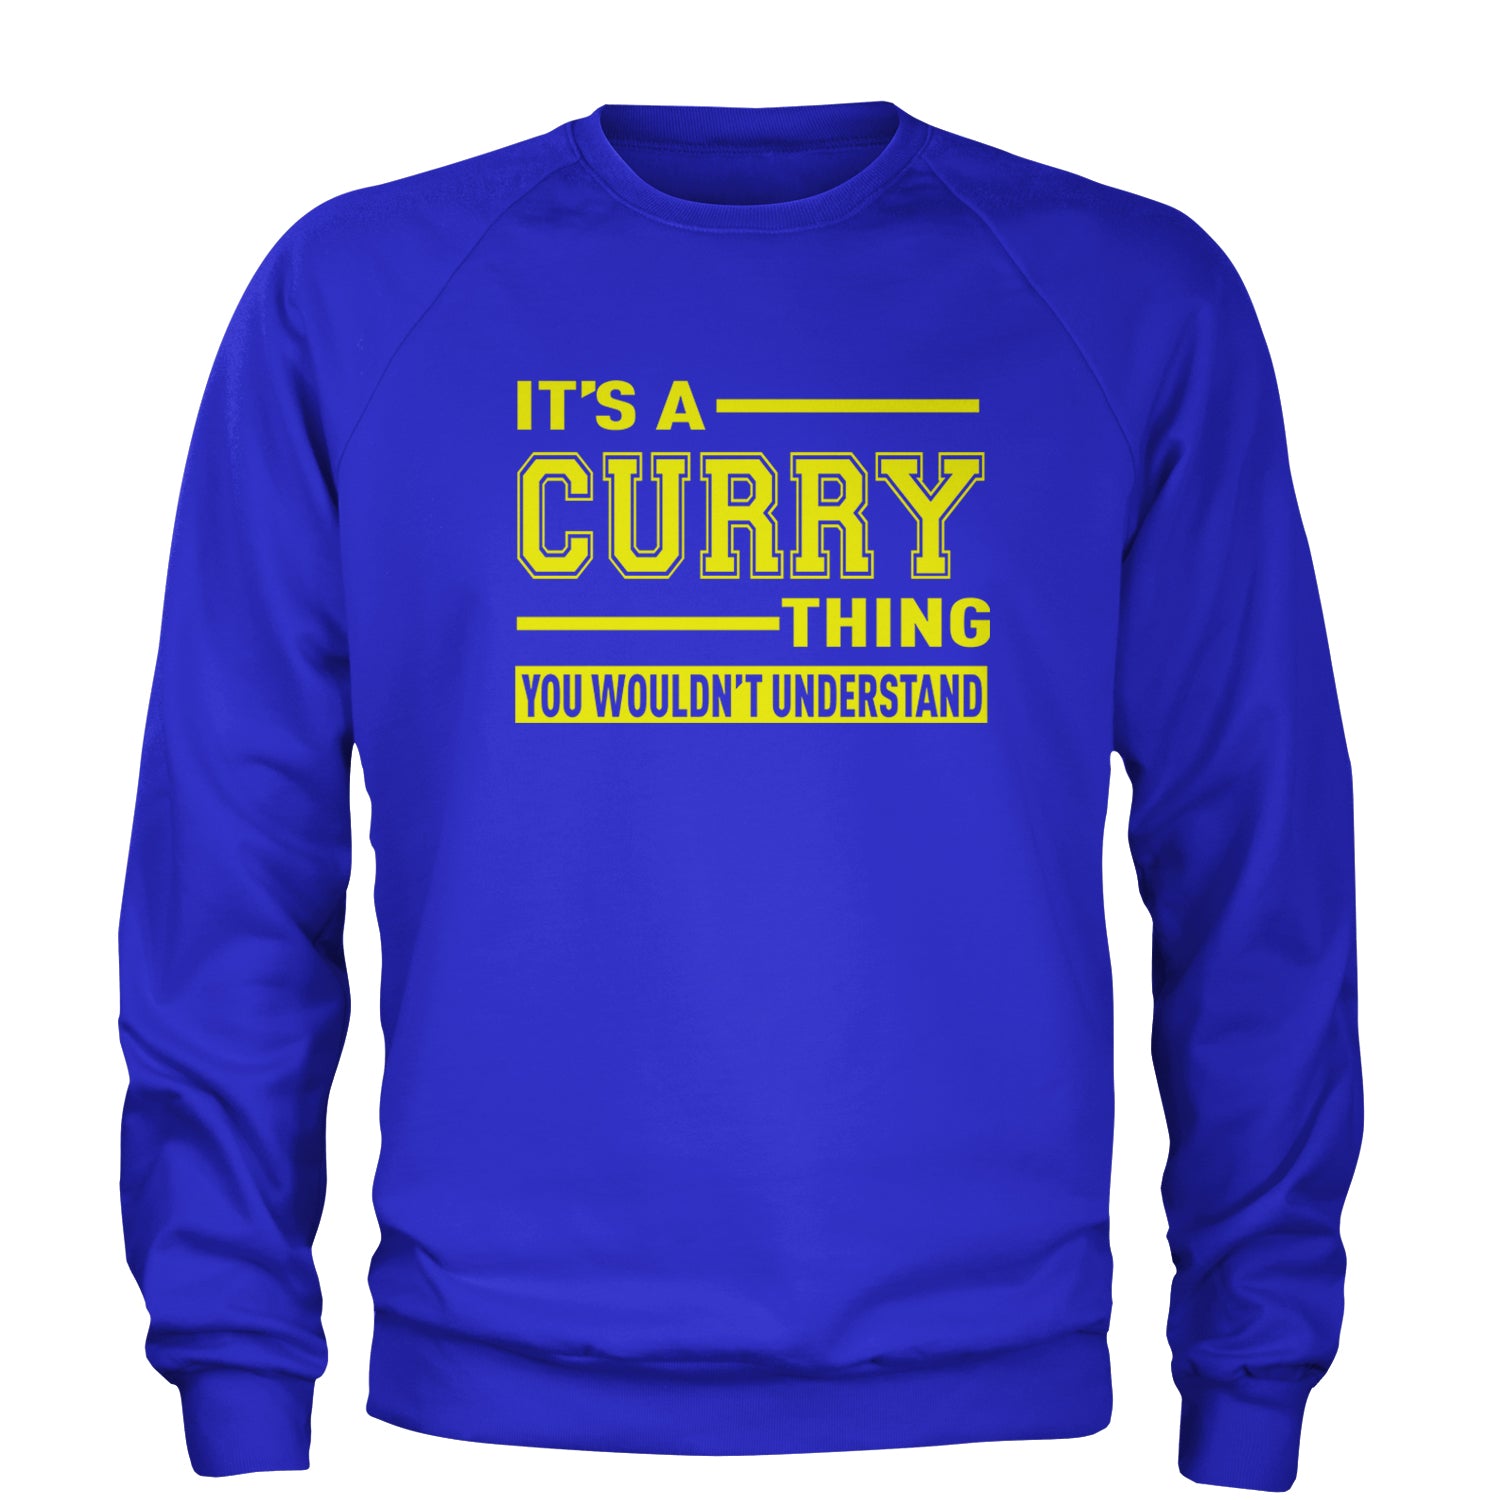 It's A Curry Thing, You Wouldn't Understand Basketball Adult Crewneck Sweatshirt